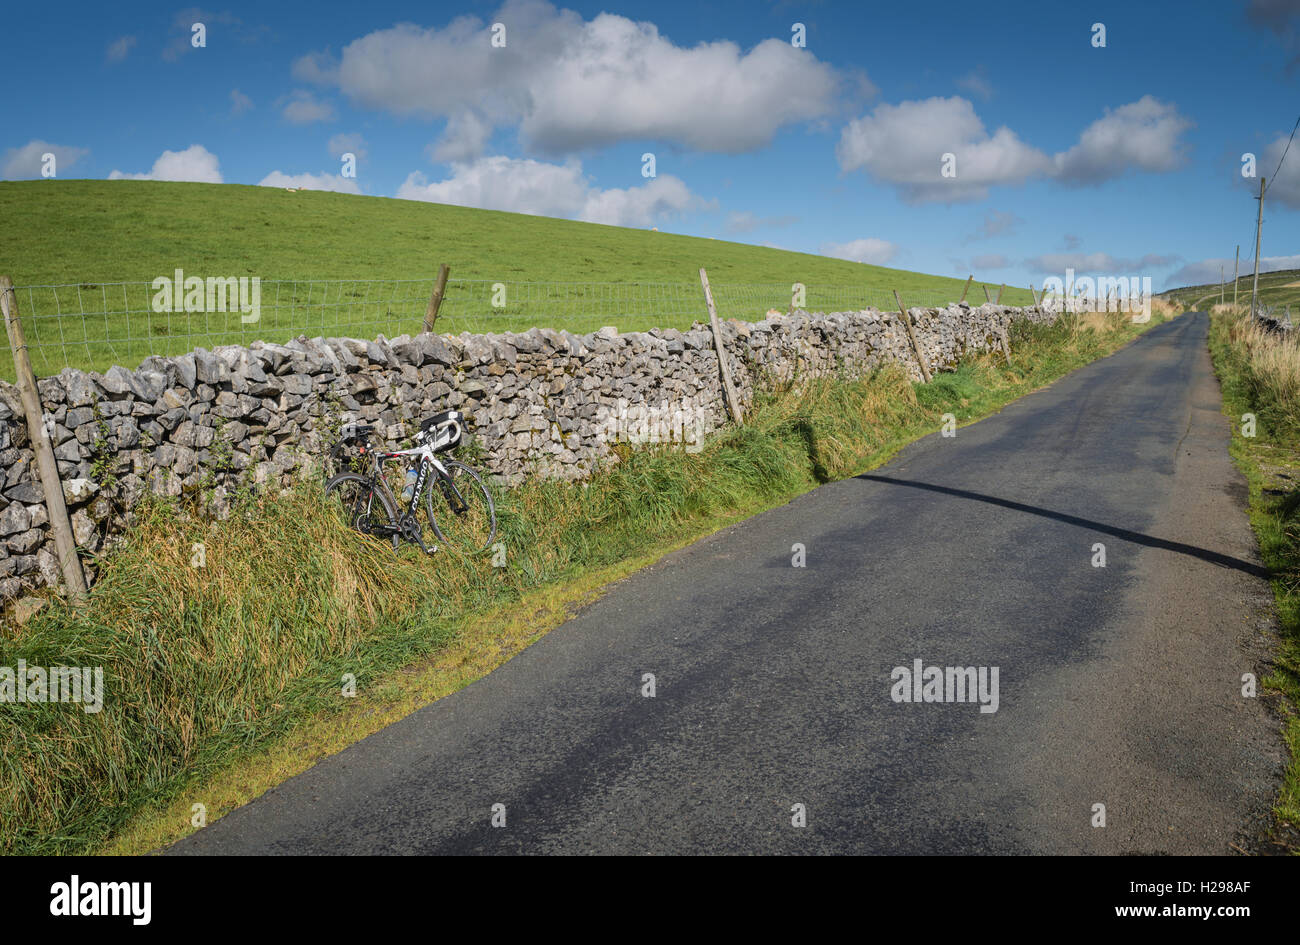 Halton Gill road and the landscape associated with it, Yorkshire Dales, UK. Stock Photo